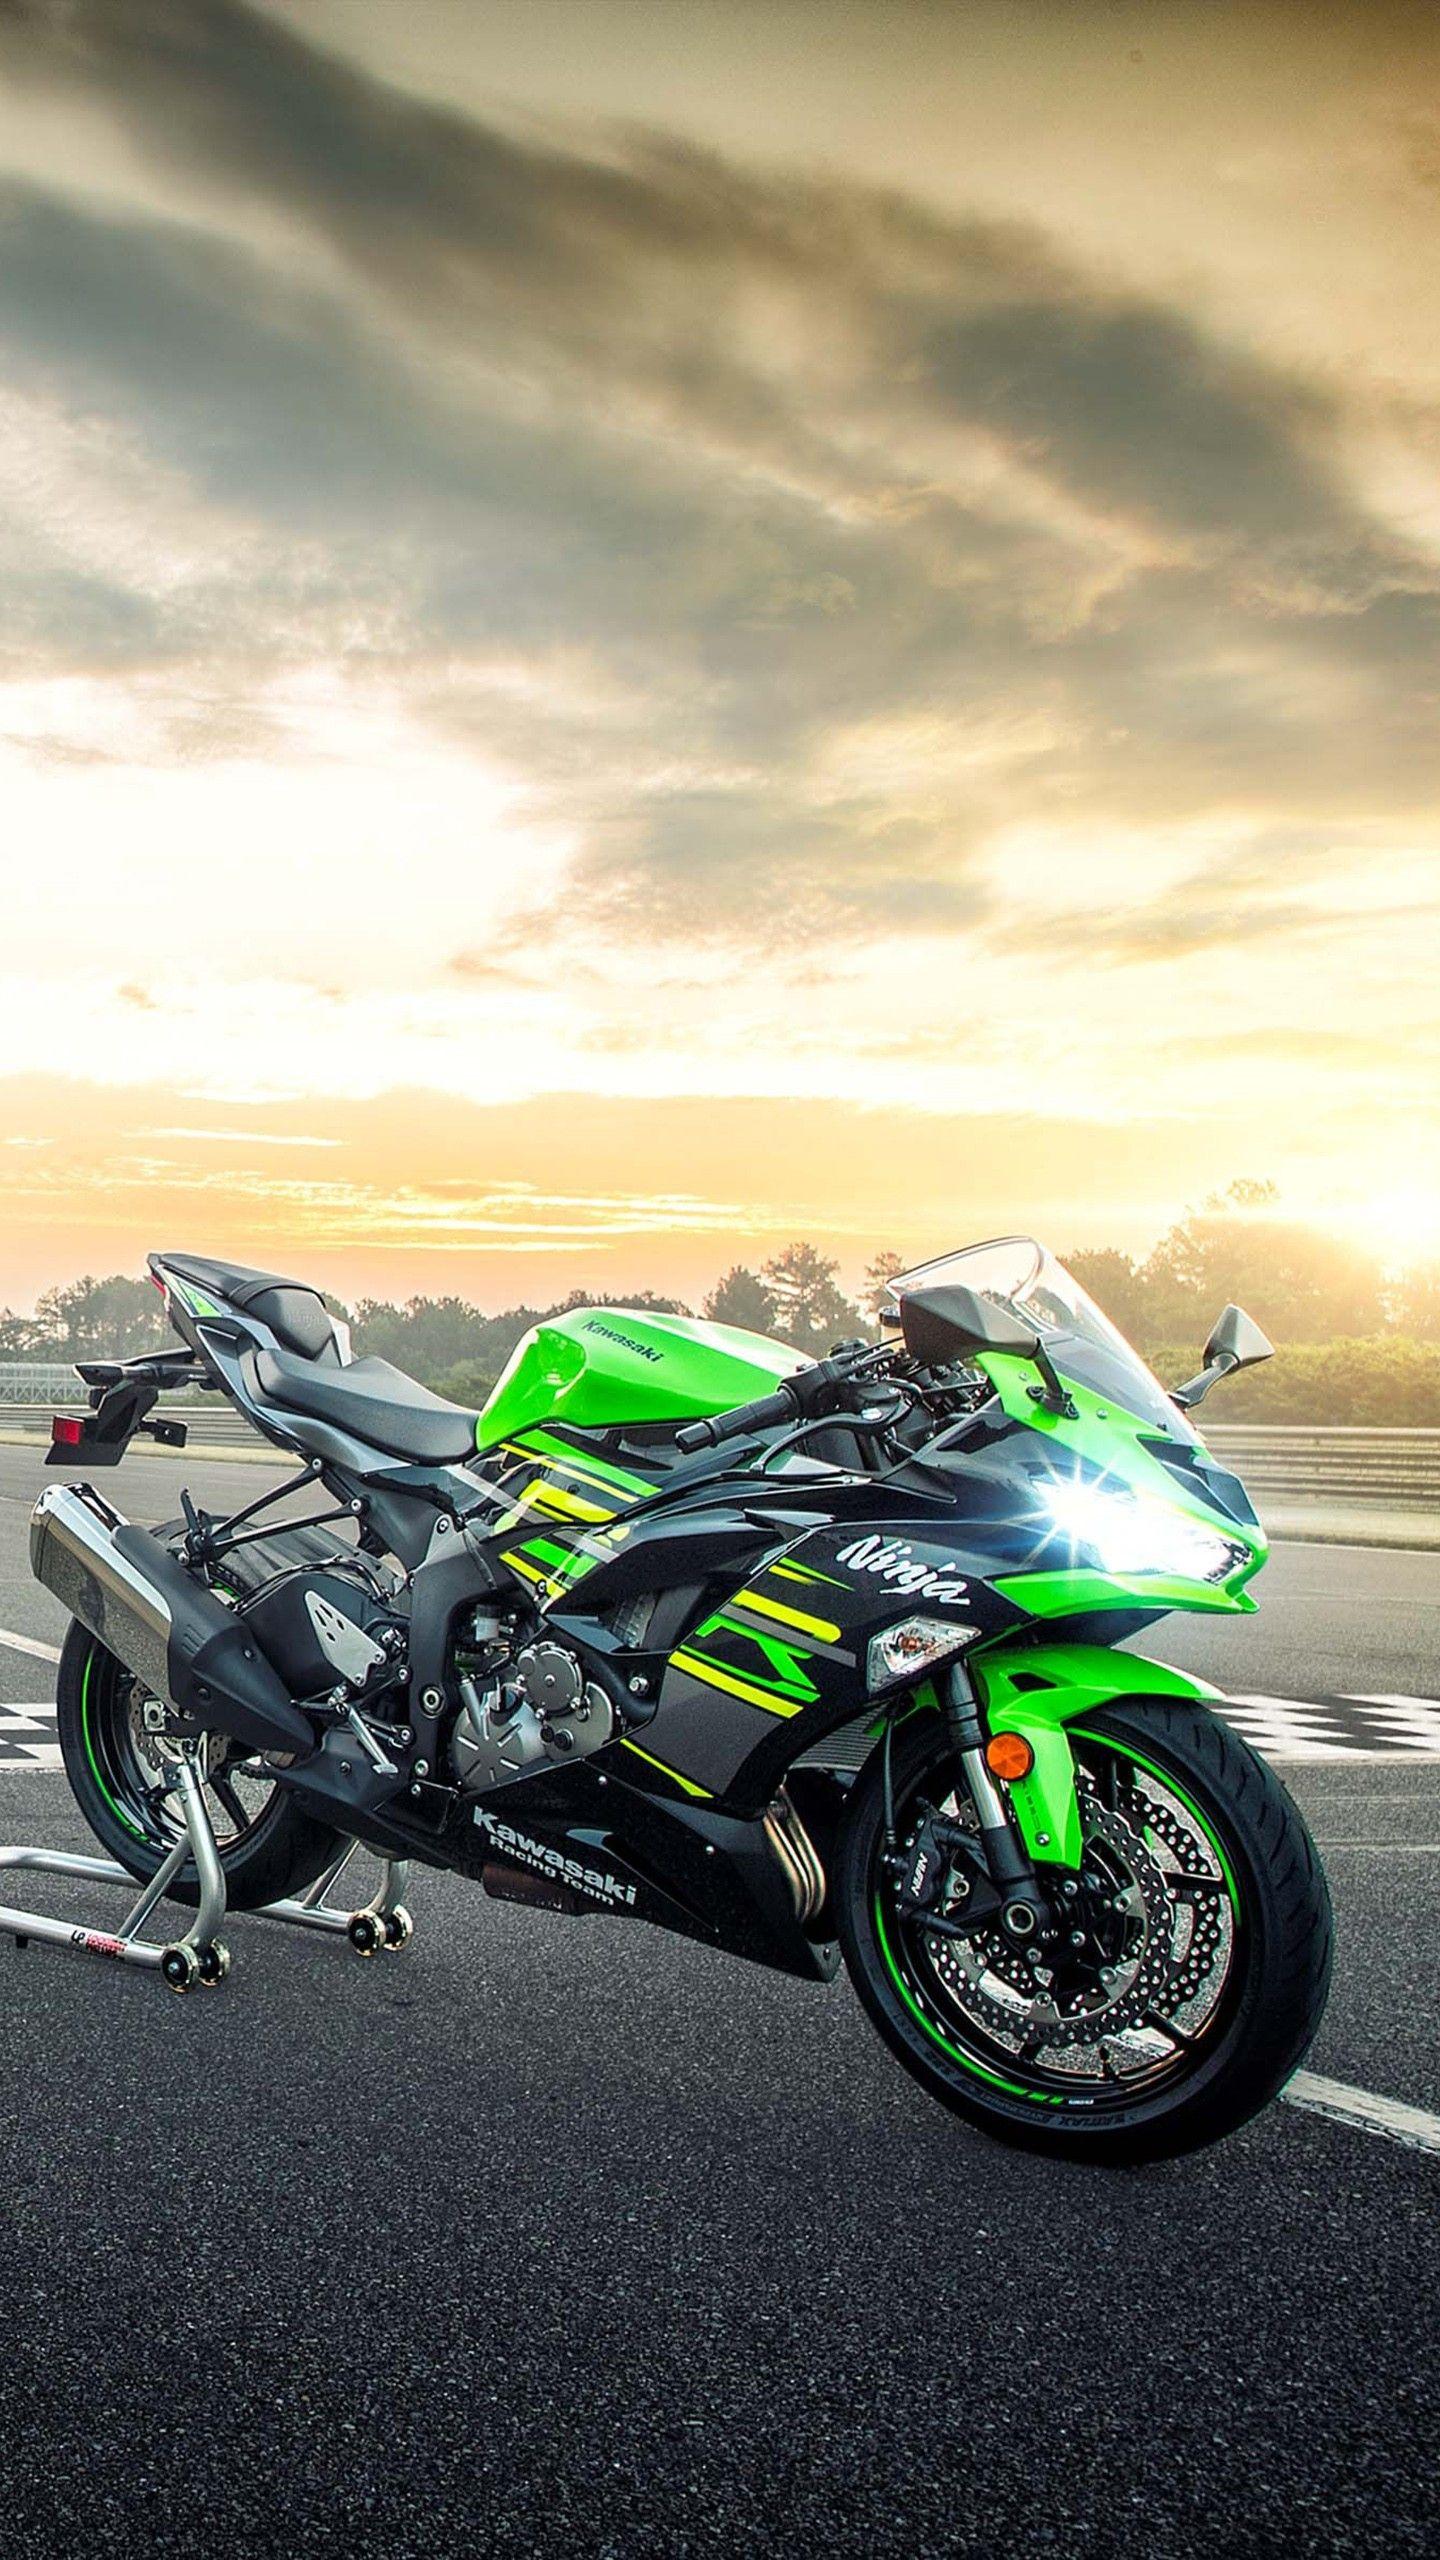 Kawasaki Ninja H2R: Is it Enough to Excite Die-Hard Enthusiasts? - TheStreet